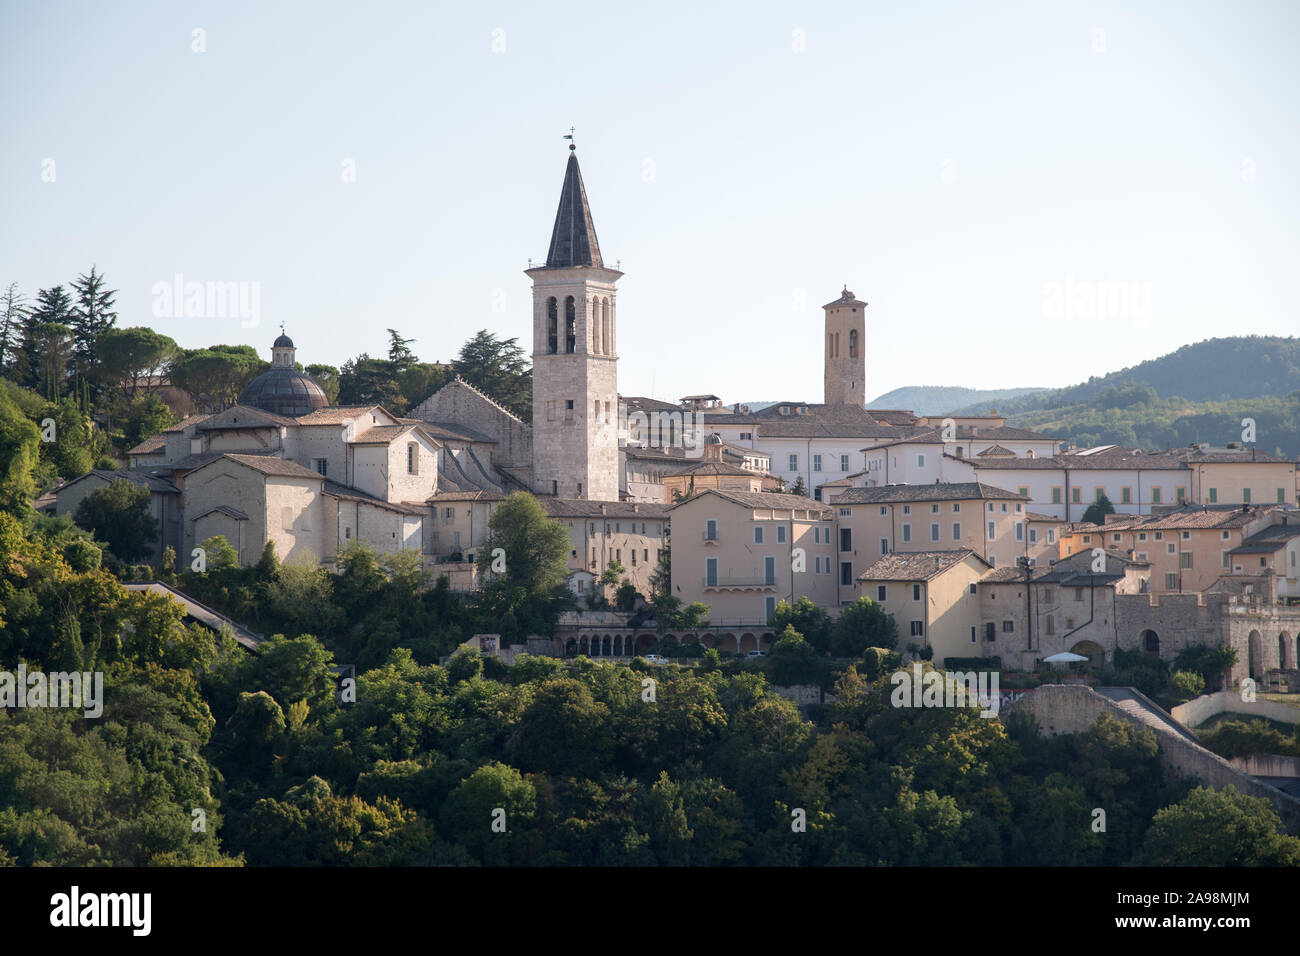 Romanesque High Resolution Stock Photography and Images - Alamy